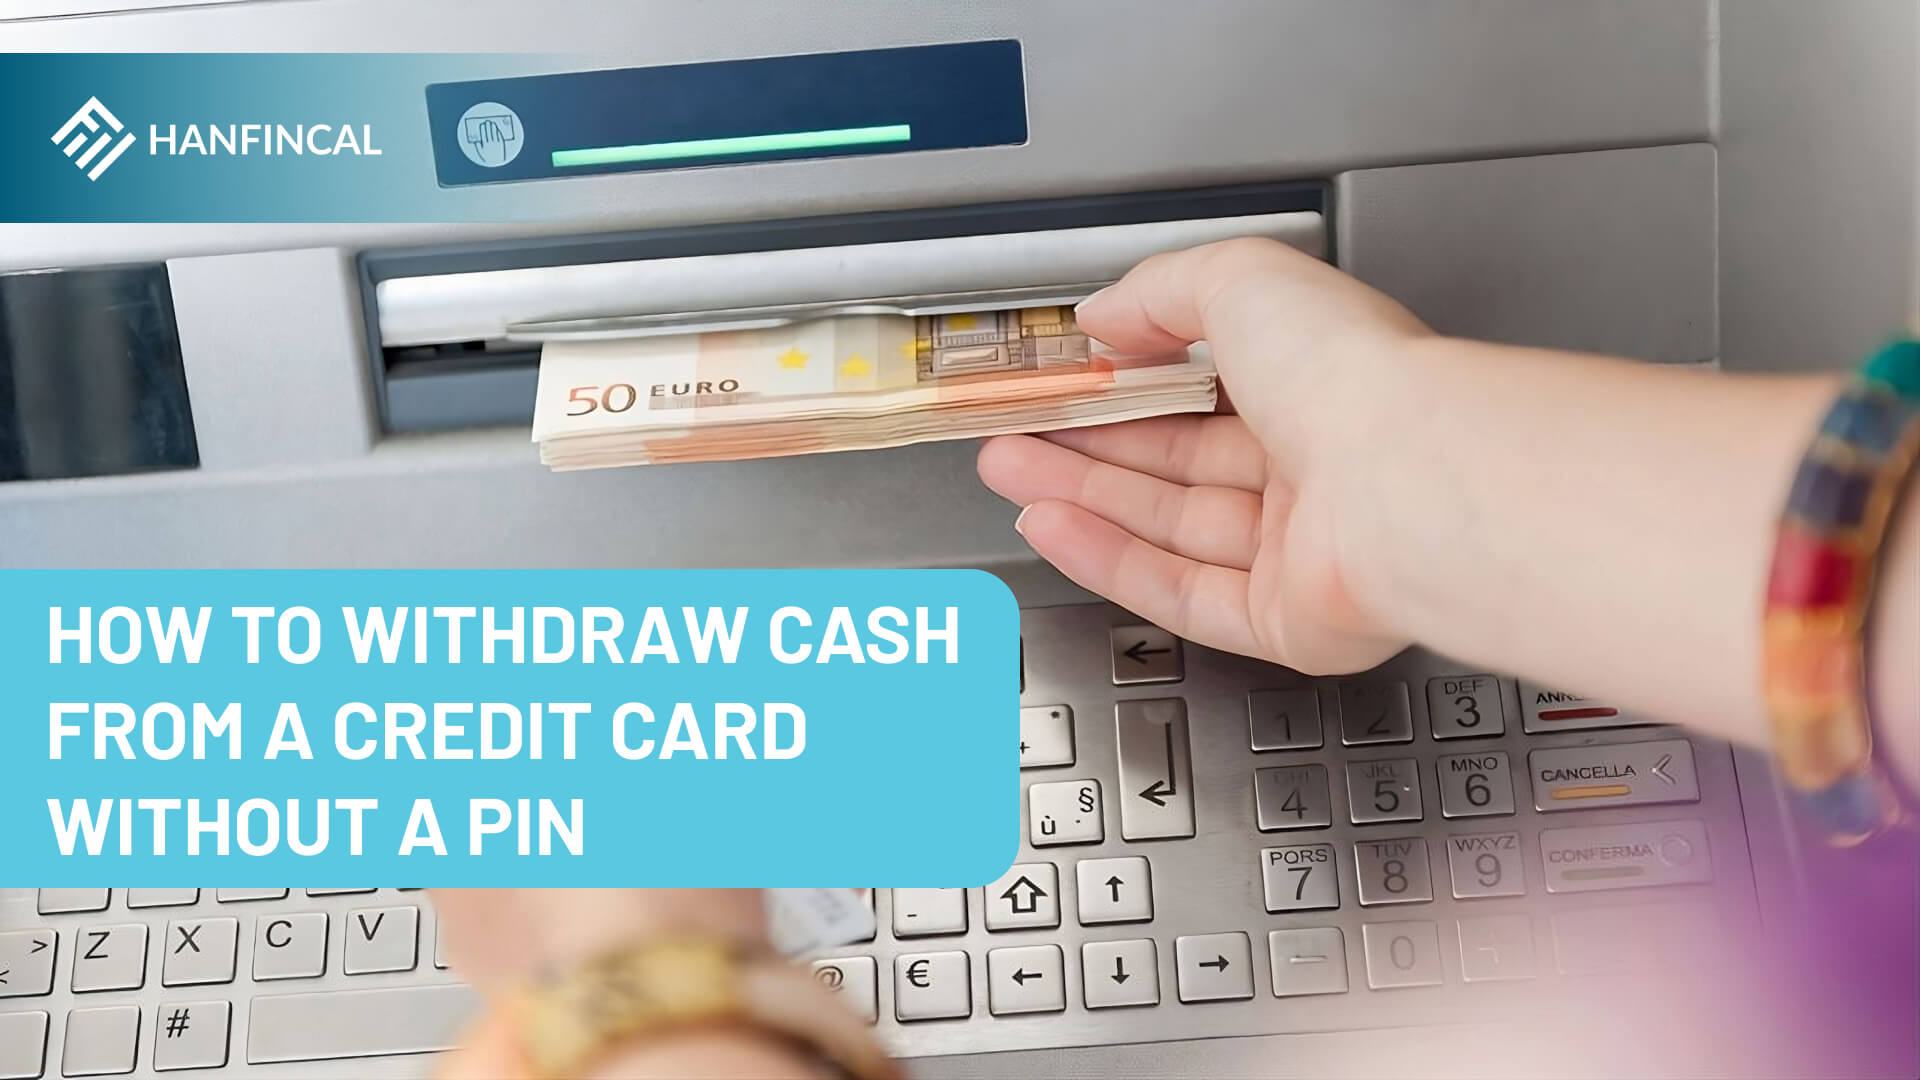 How to withdraw cash from a credit card without a pin?